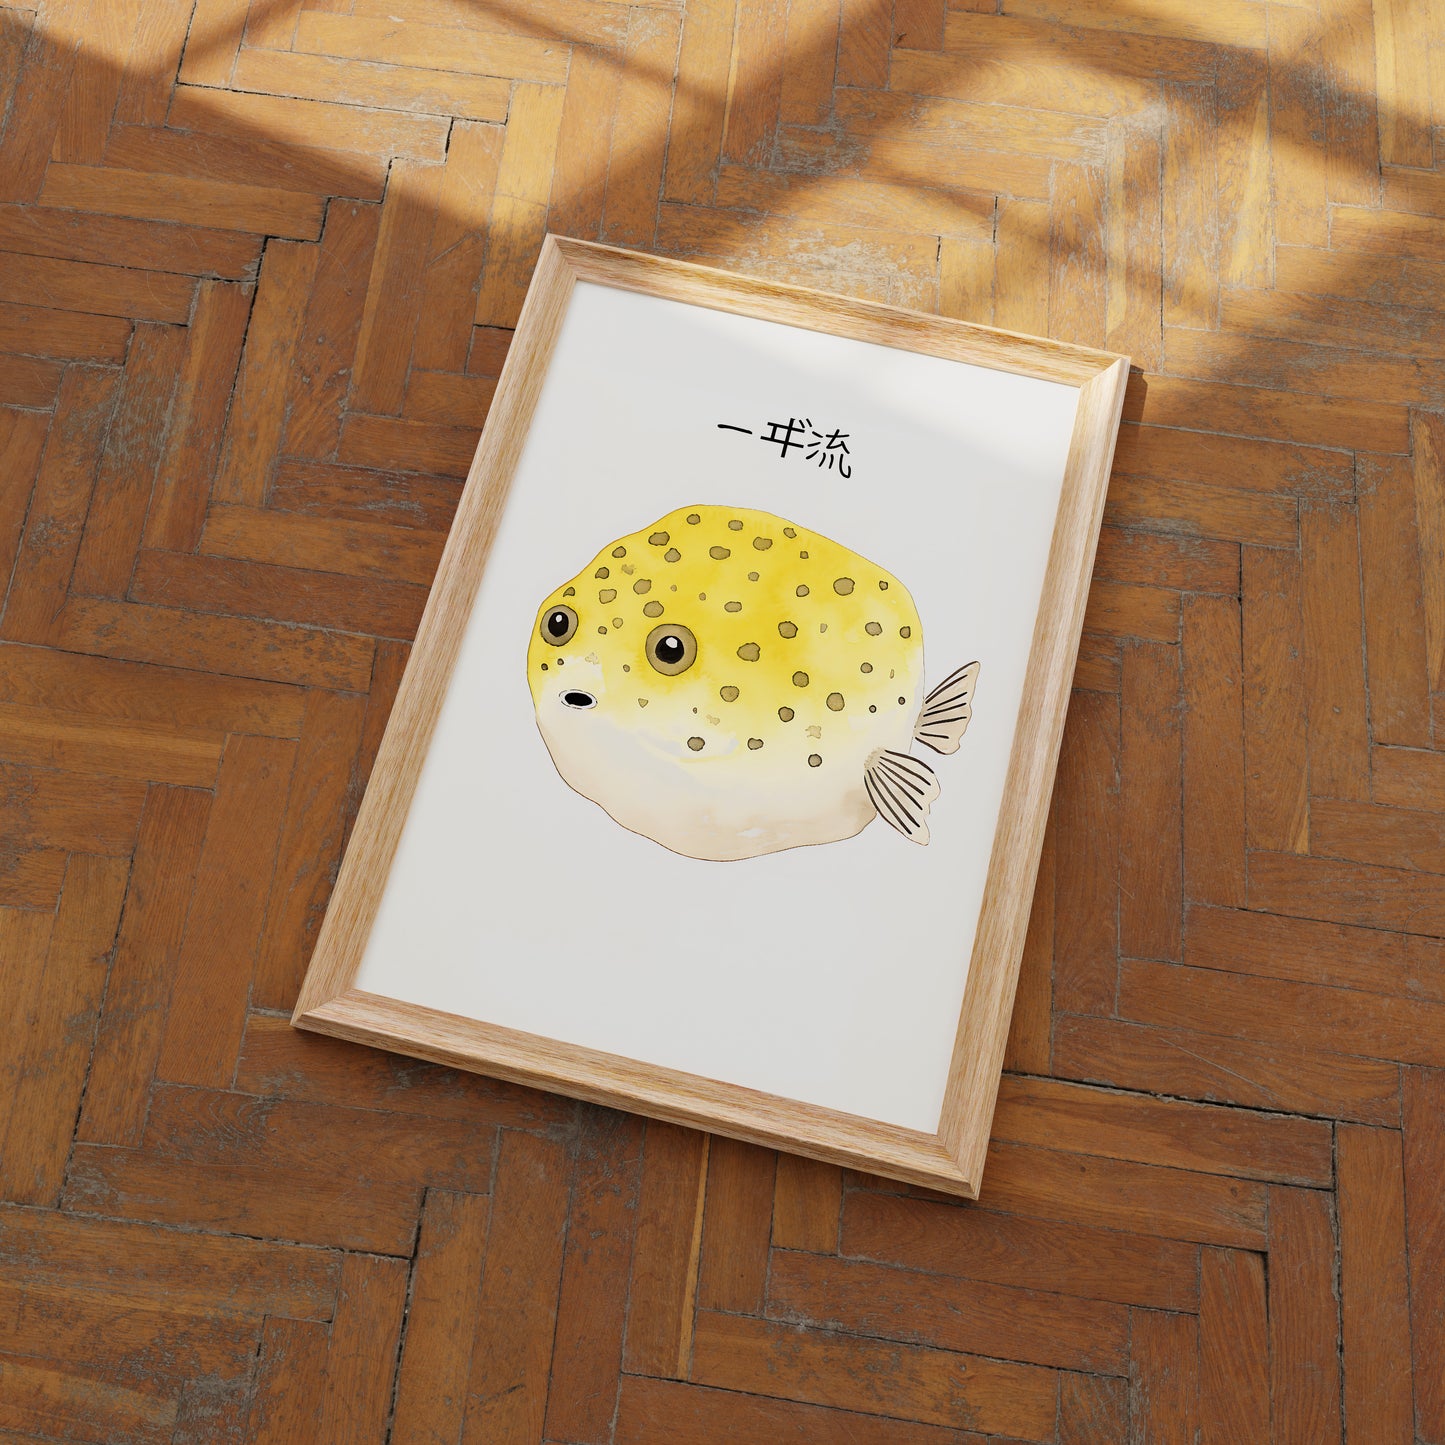 Illustration of a pufferfish in a wooden frame on a herringbone floor.